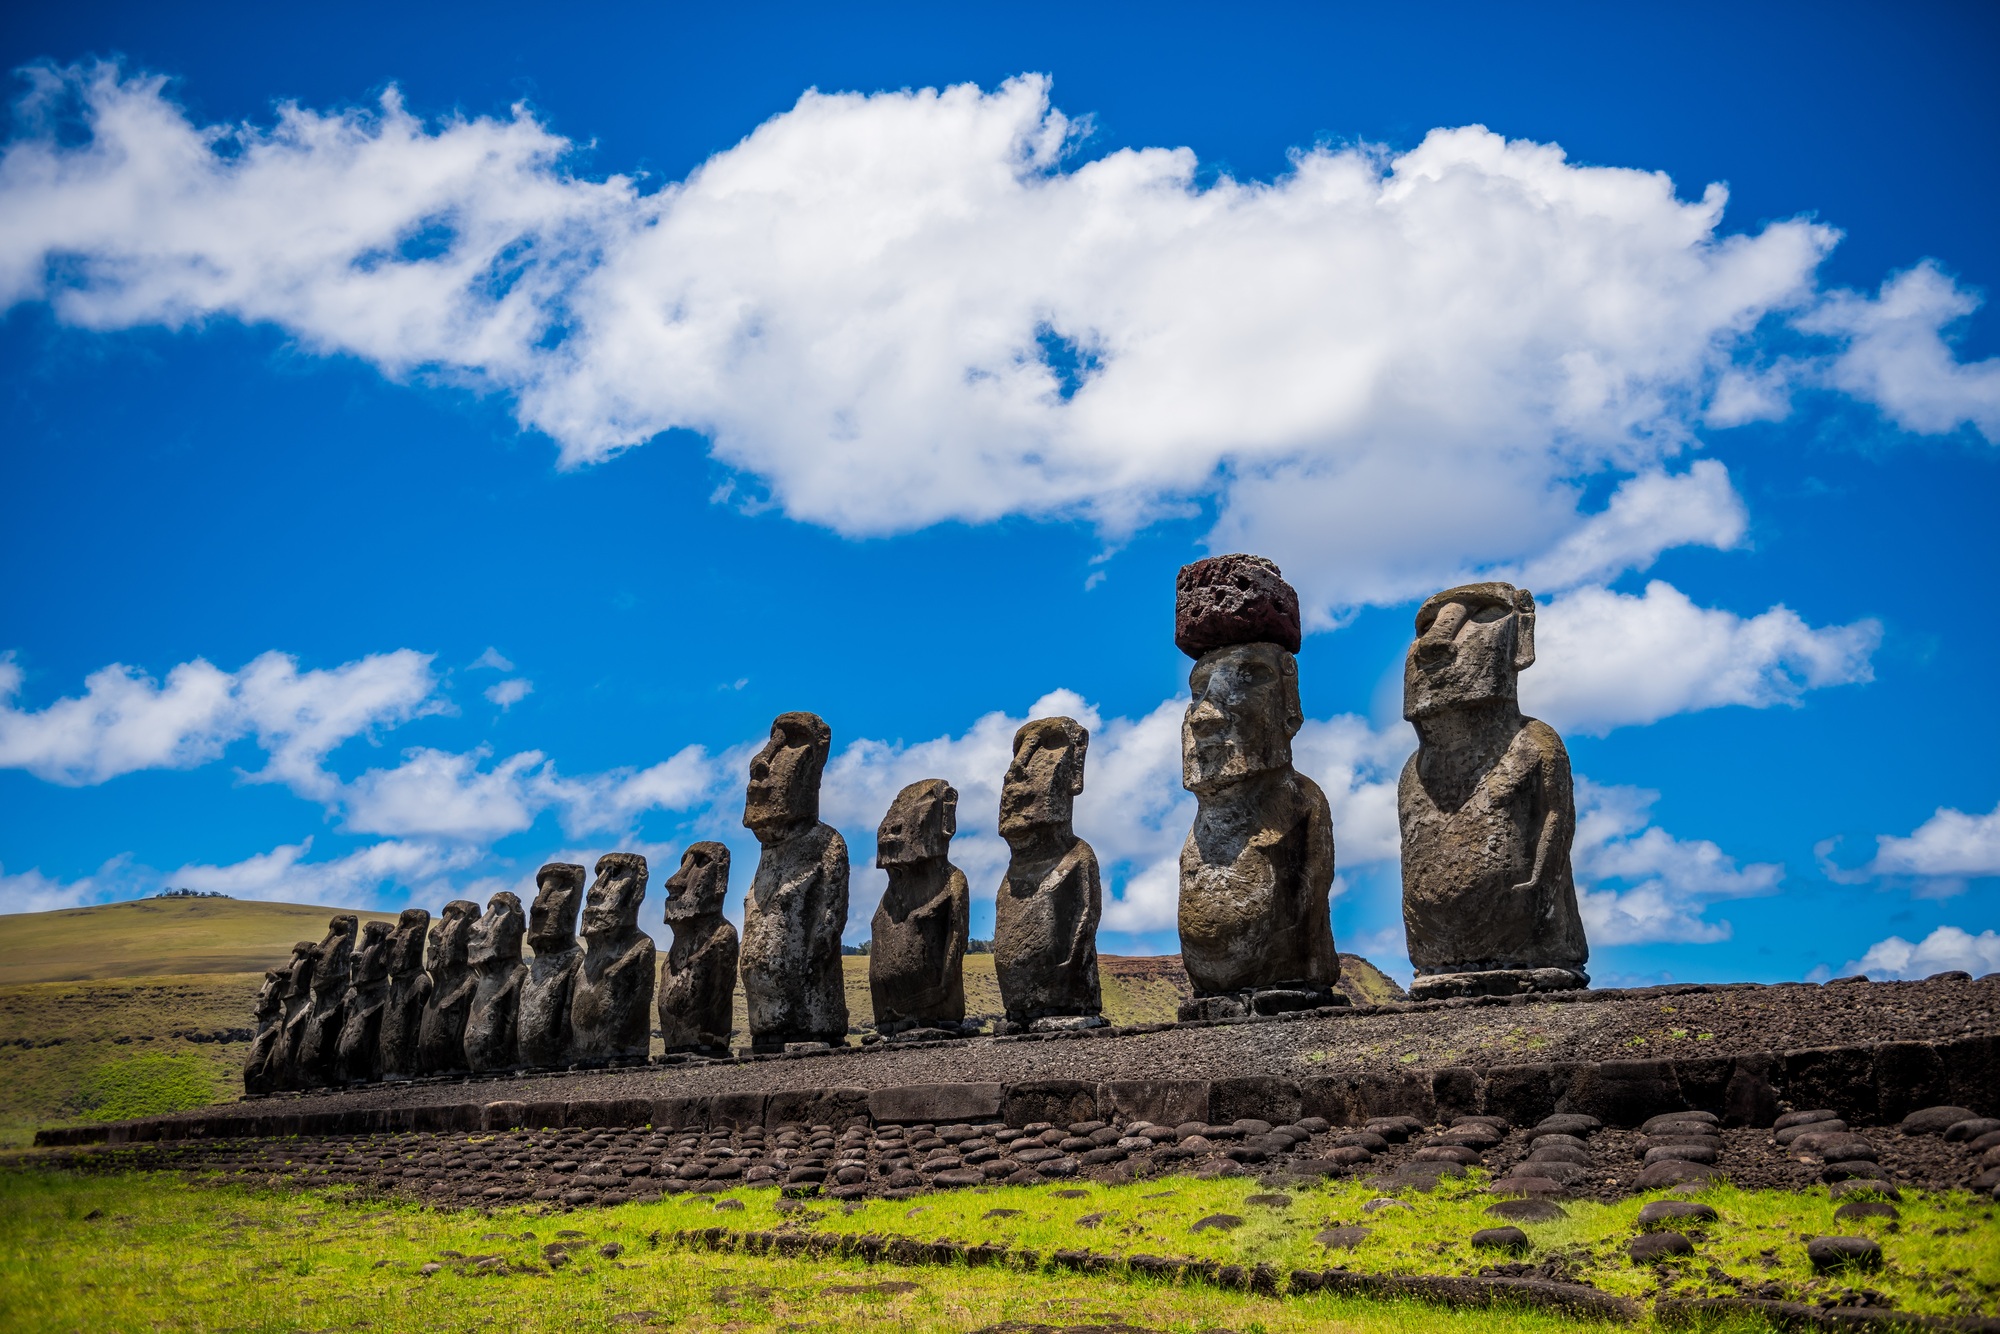 From Rio to Machu Piccu The 9 Best Places to Visit in South America